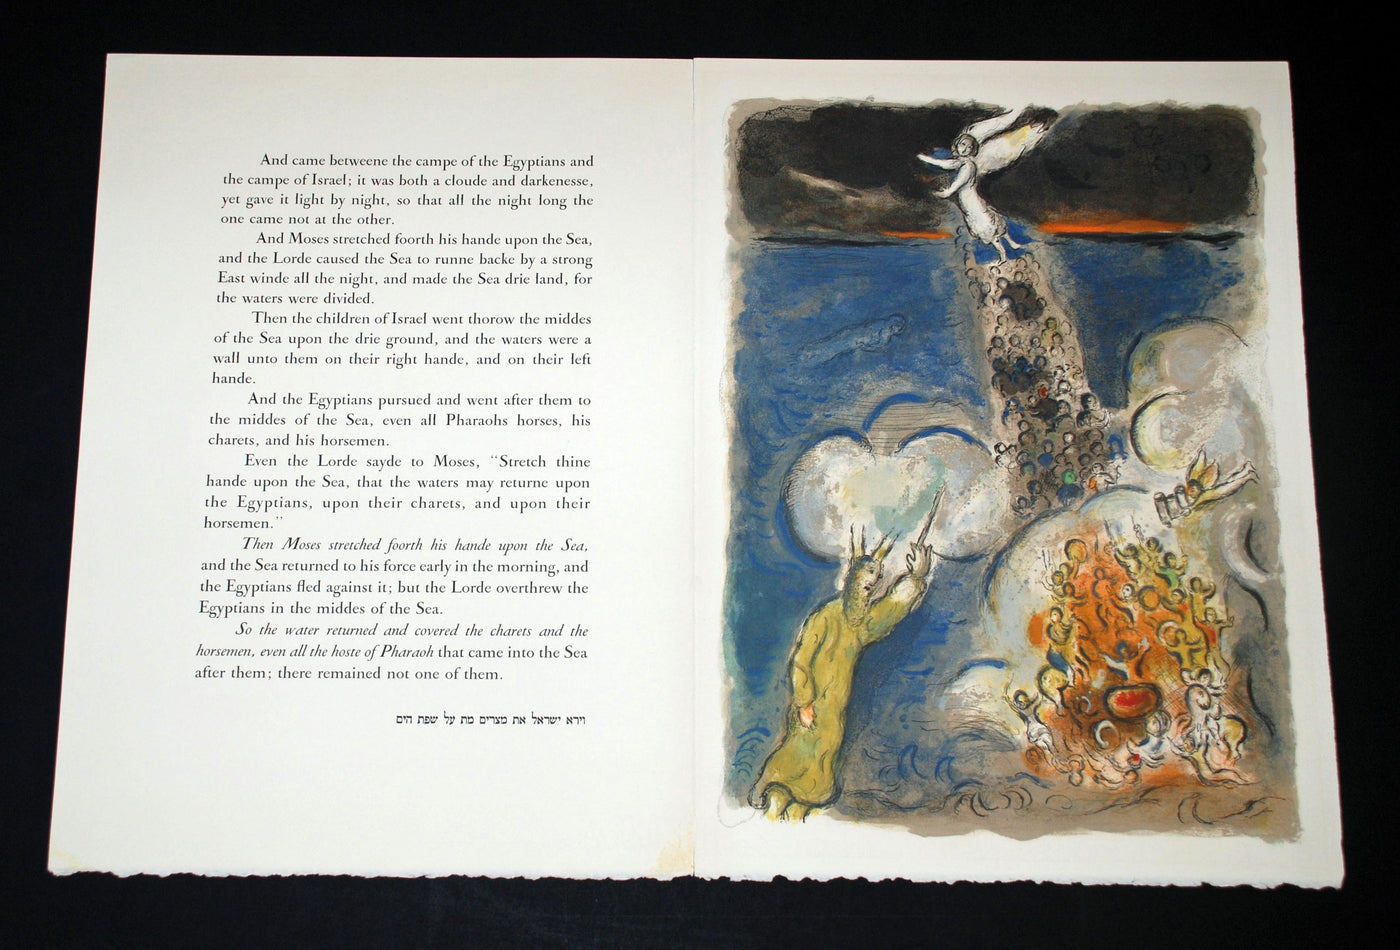 Marc Chagall Moses Calls the Waters Down on the Egyptian Army, from The Story of Exodus (Mourlot 453, Cramer no. 64) 1966